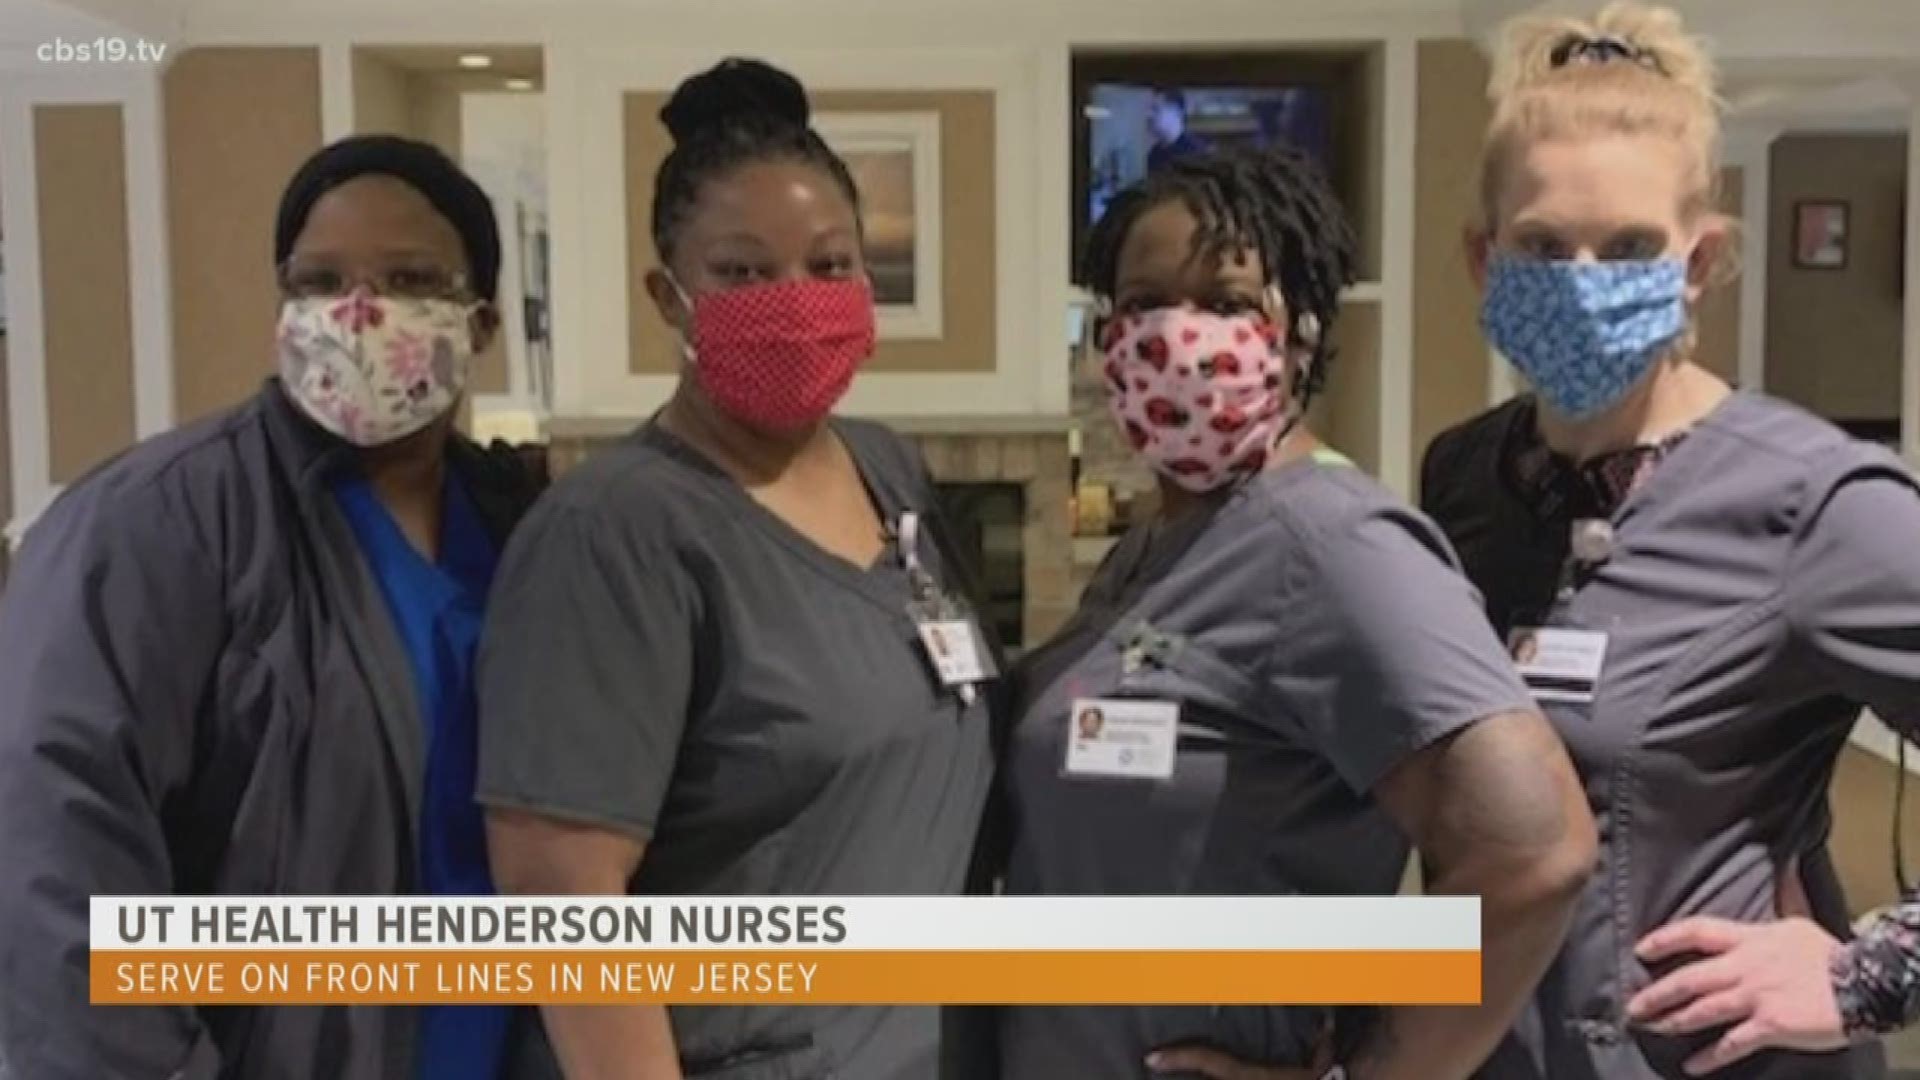 Four nurses from UT Health Henderson returned to work after spending two weeks helping at a New Jersey hospital during the height of the COVID-19 outbreak.